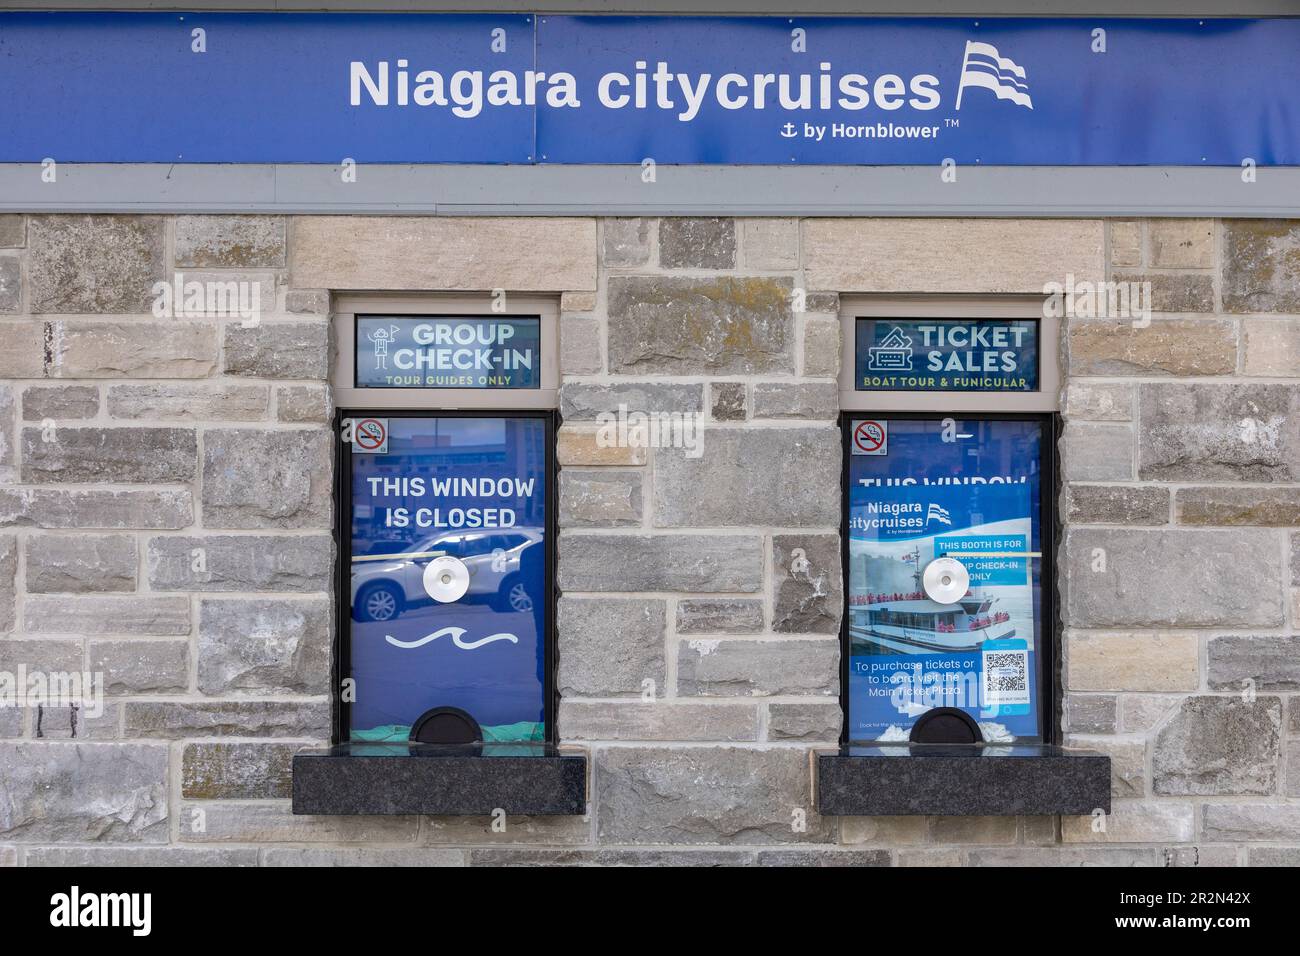 Ticket Windows For Niagara City Cruises Tourist Boats By Hornblower Company Canadian These Are the Tourist Boats To Niagara Falls Ontario Canada Stock Photo